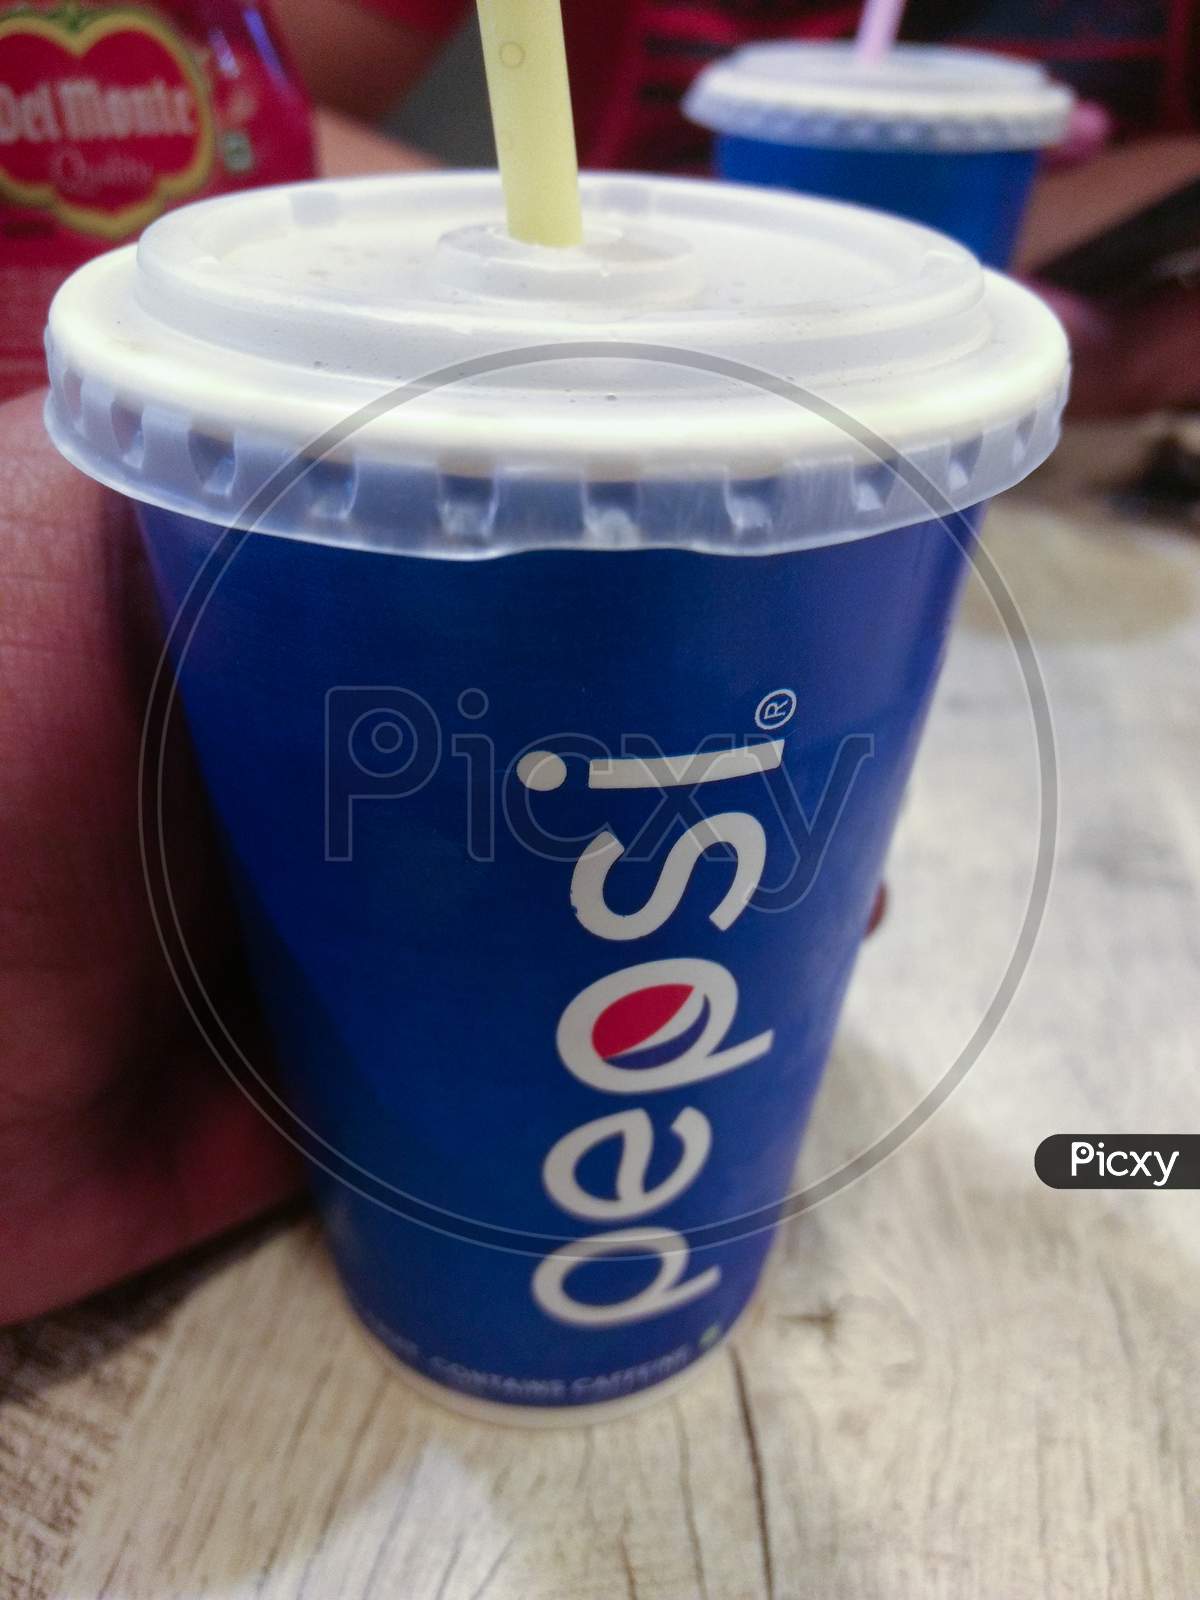 India, Delhi -June 5,2019 : Paper Glasses Of Pepsi Soft Drink In Hand On Wooden Table At Food Court